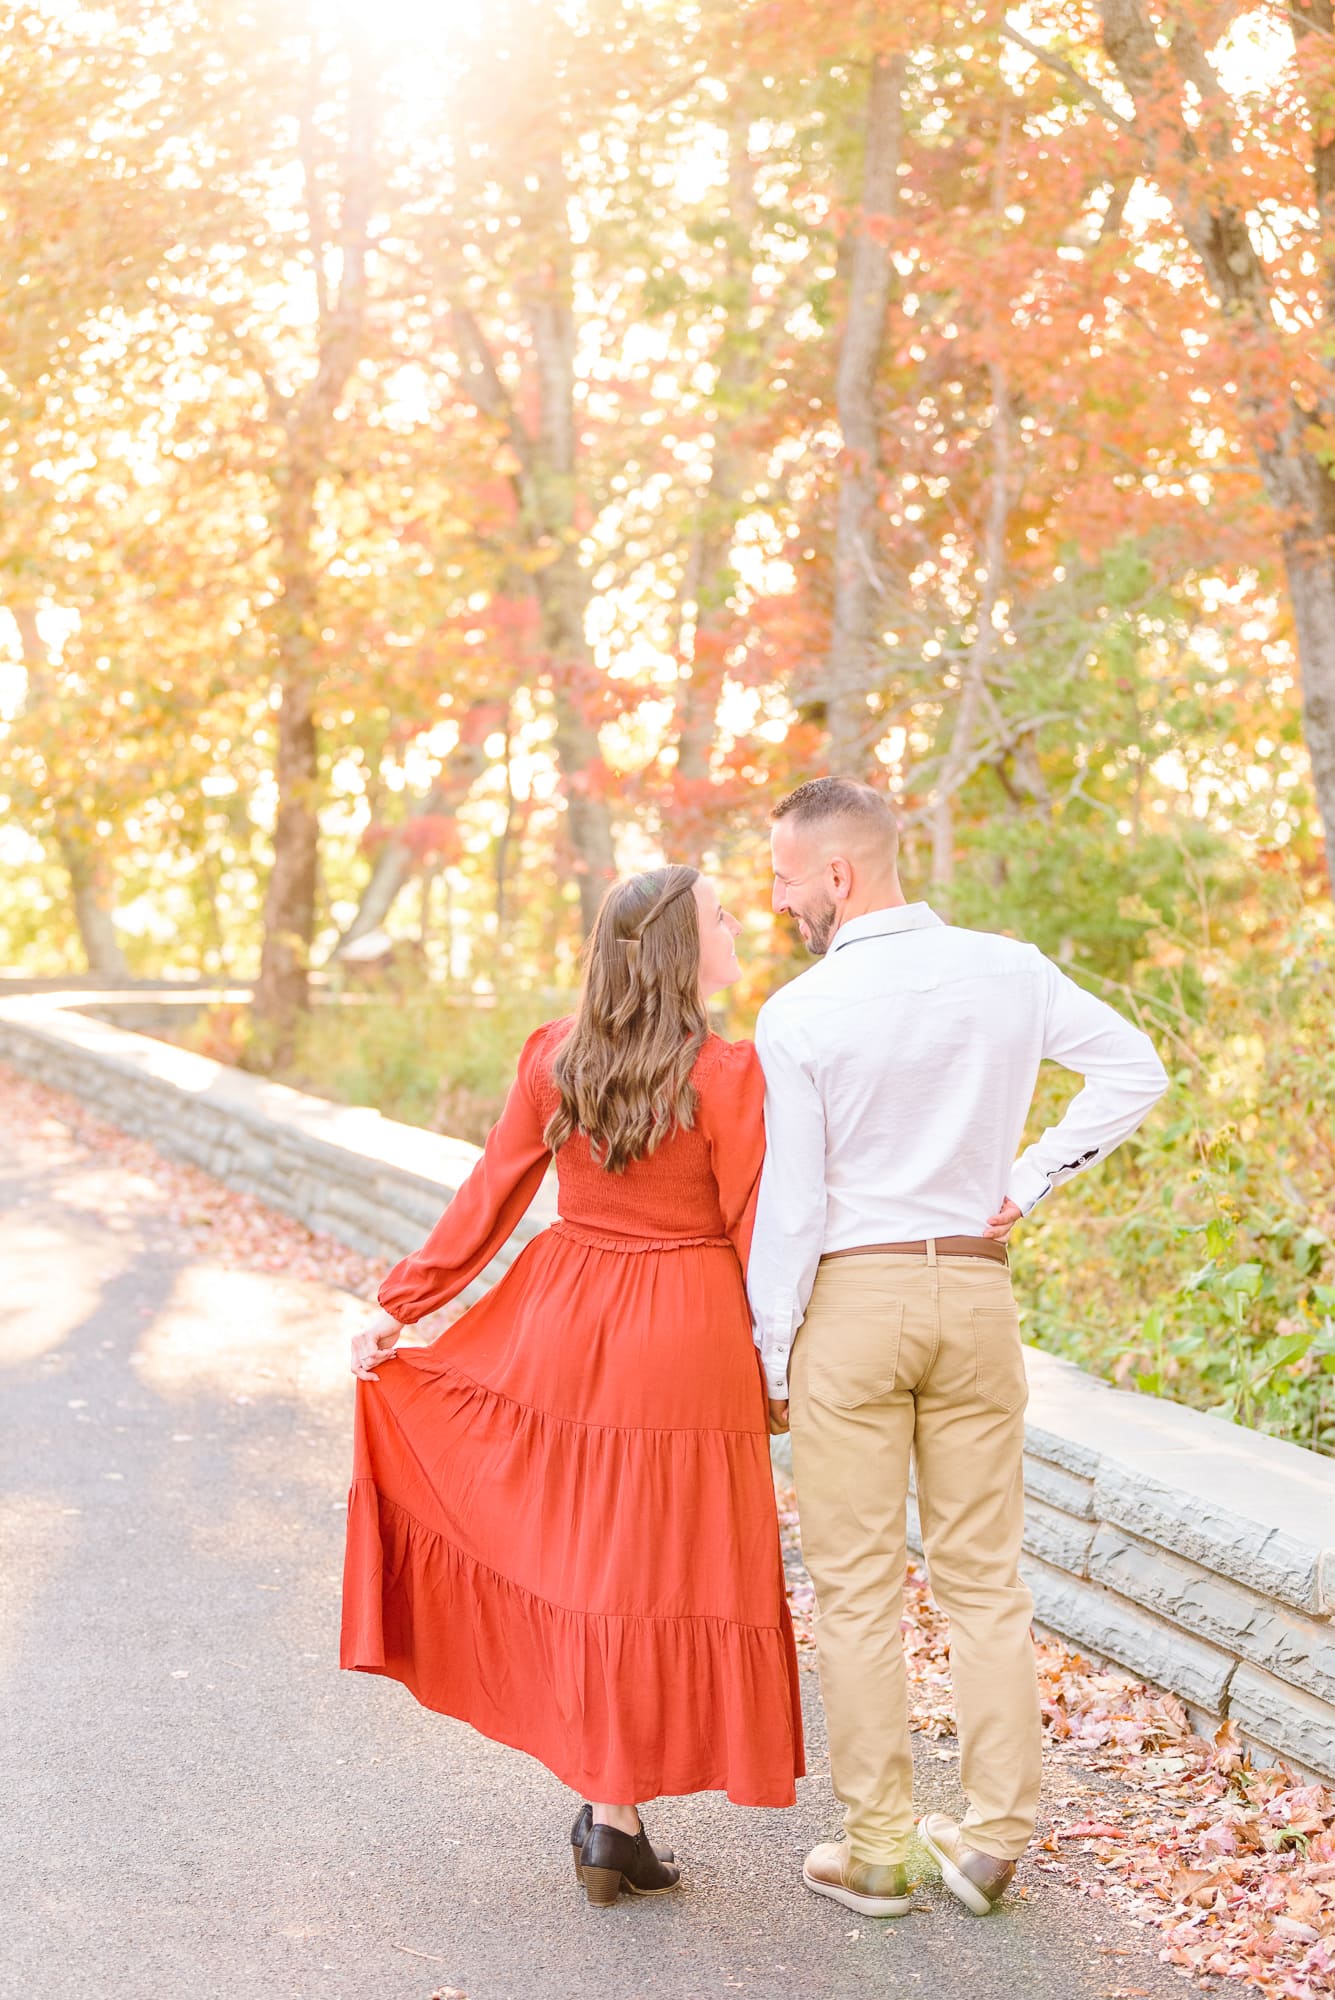 Alicia and Joey walk through the colorful trees during their fall engagement photos in North Carolina.